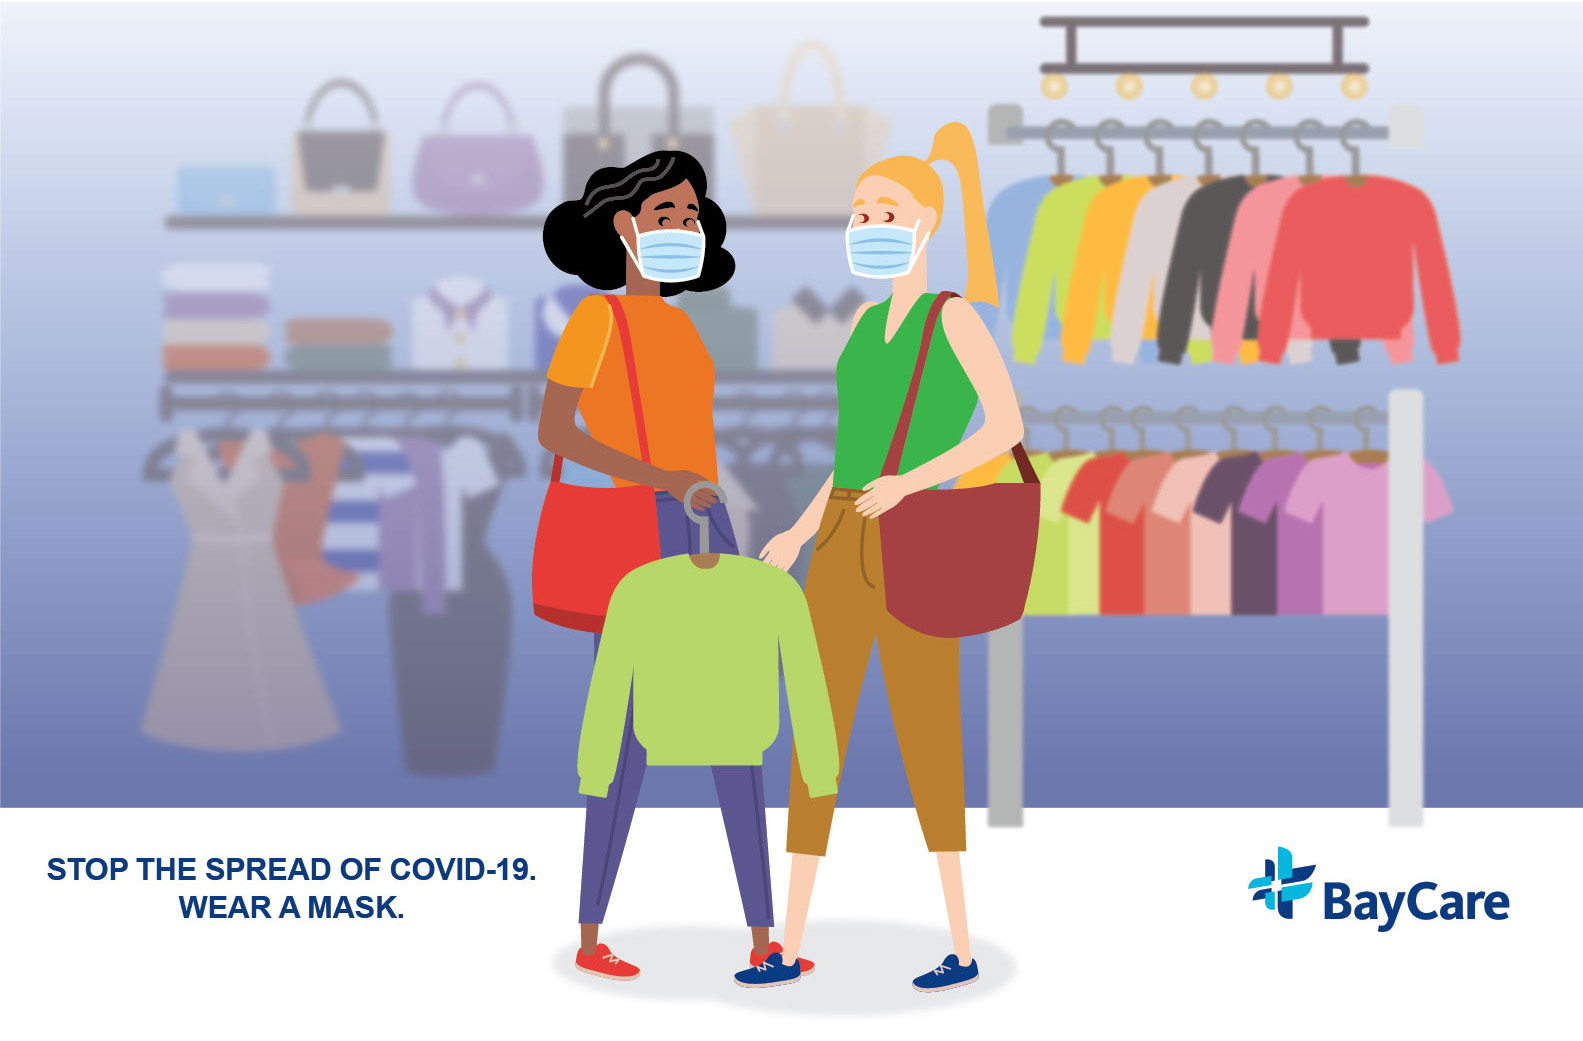 Illustration of two women shopping and wearing face masks